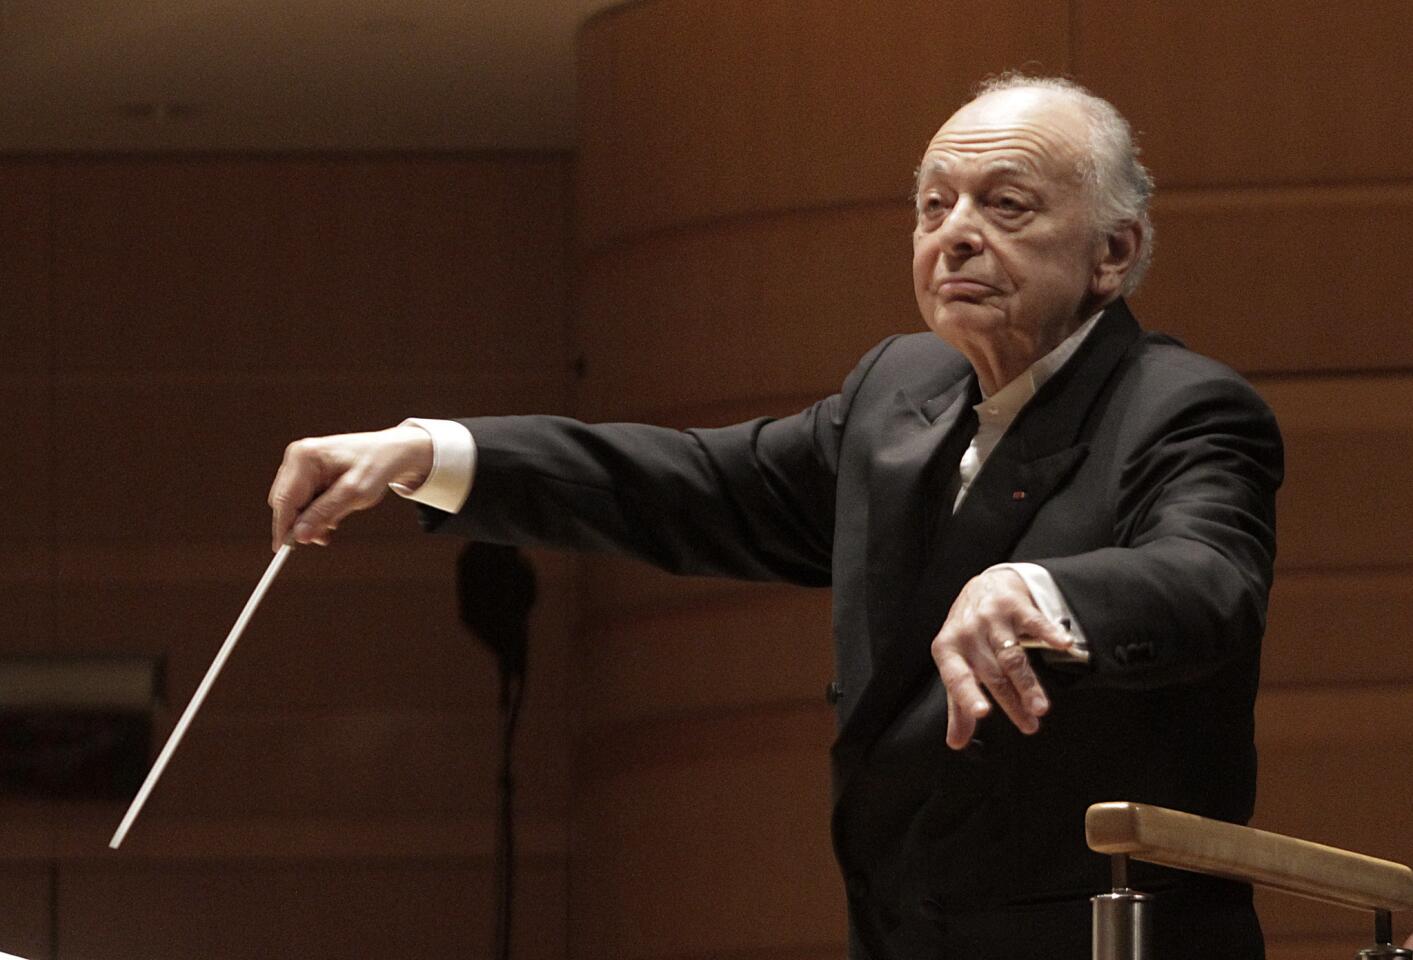 Lorin Maazel conducting the Vienna Philharmonic in a concert of Schubert and Mahler at the Renee and Henry Segerstrom Concert Hall in Costa Mesa on Mar. 3, 2014.